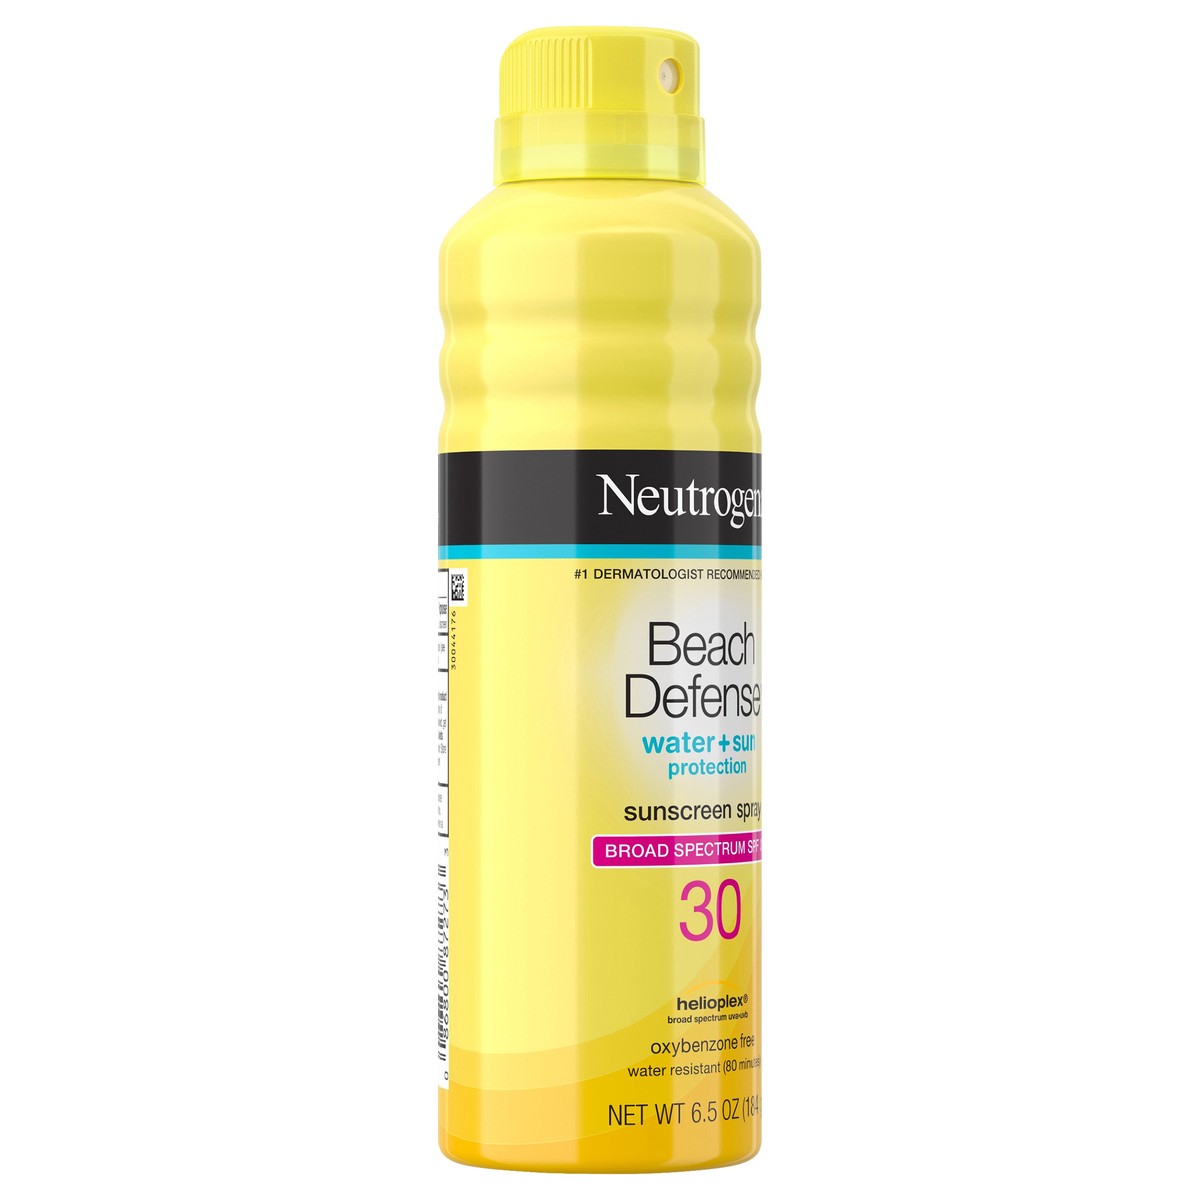 slide 3 of 6, Neutrogena Beach Defense Sunscreen Spray SPF 30 Water-Resistant Sunscreen Body Spray with Broad Spectrum SPF 30, PABA-Free, Oxybenzone-Free & Fast-Drying, Superior Sun Protection, 6.5 oz, 6.5 oz